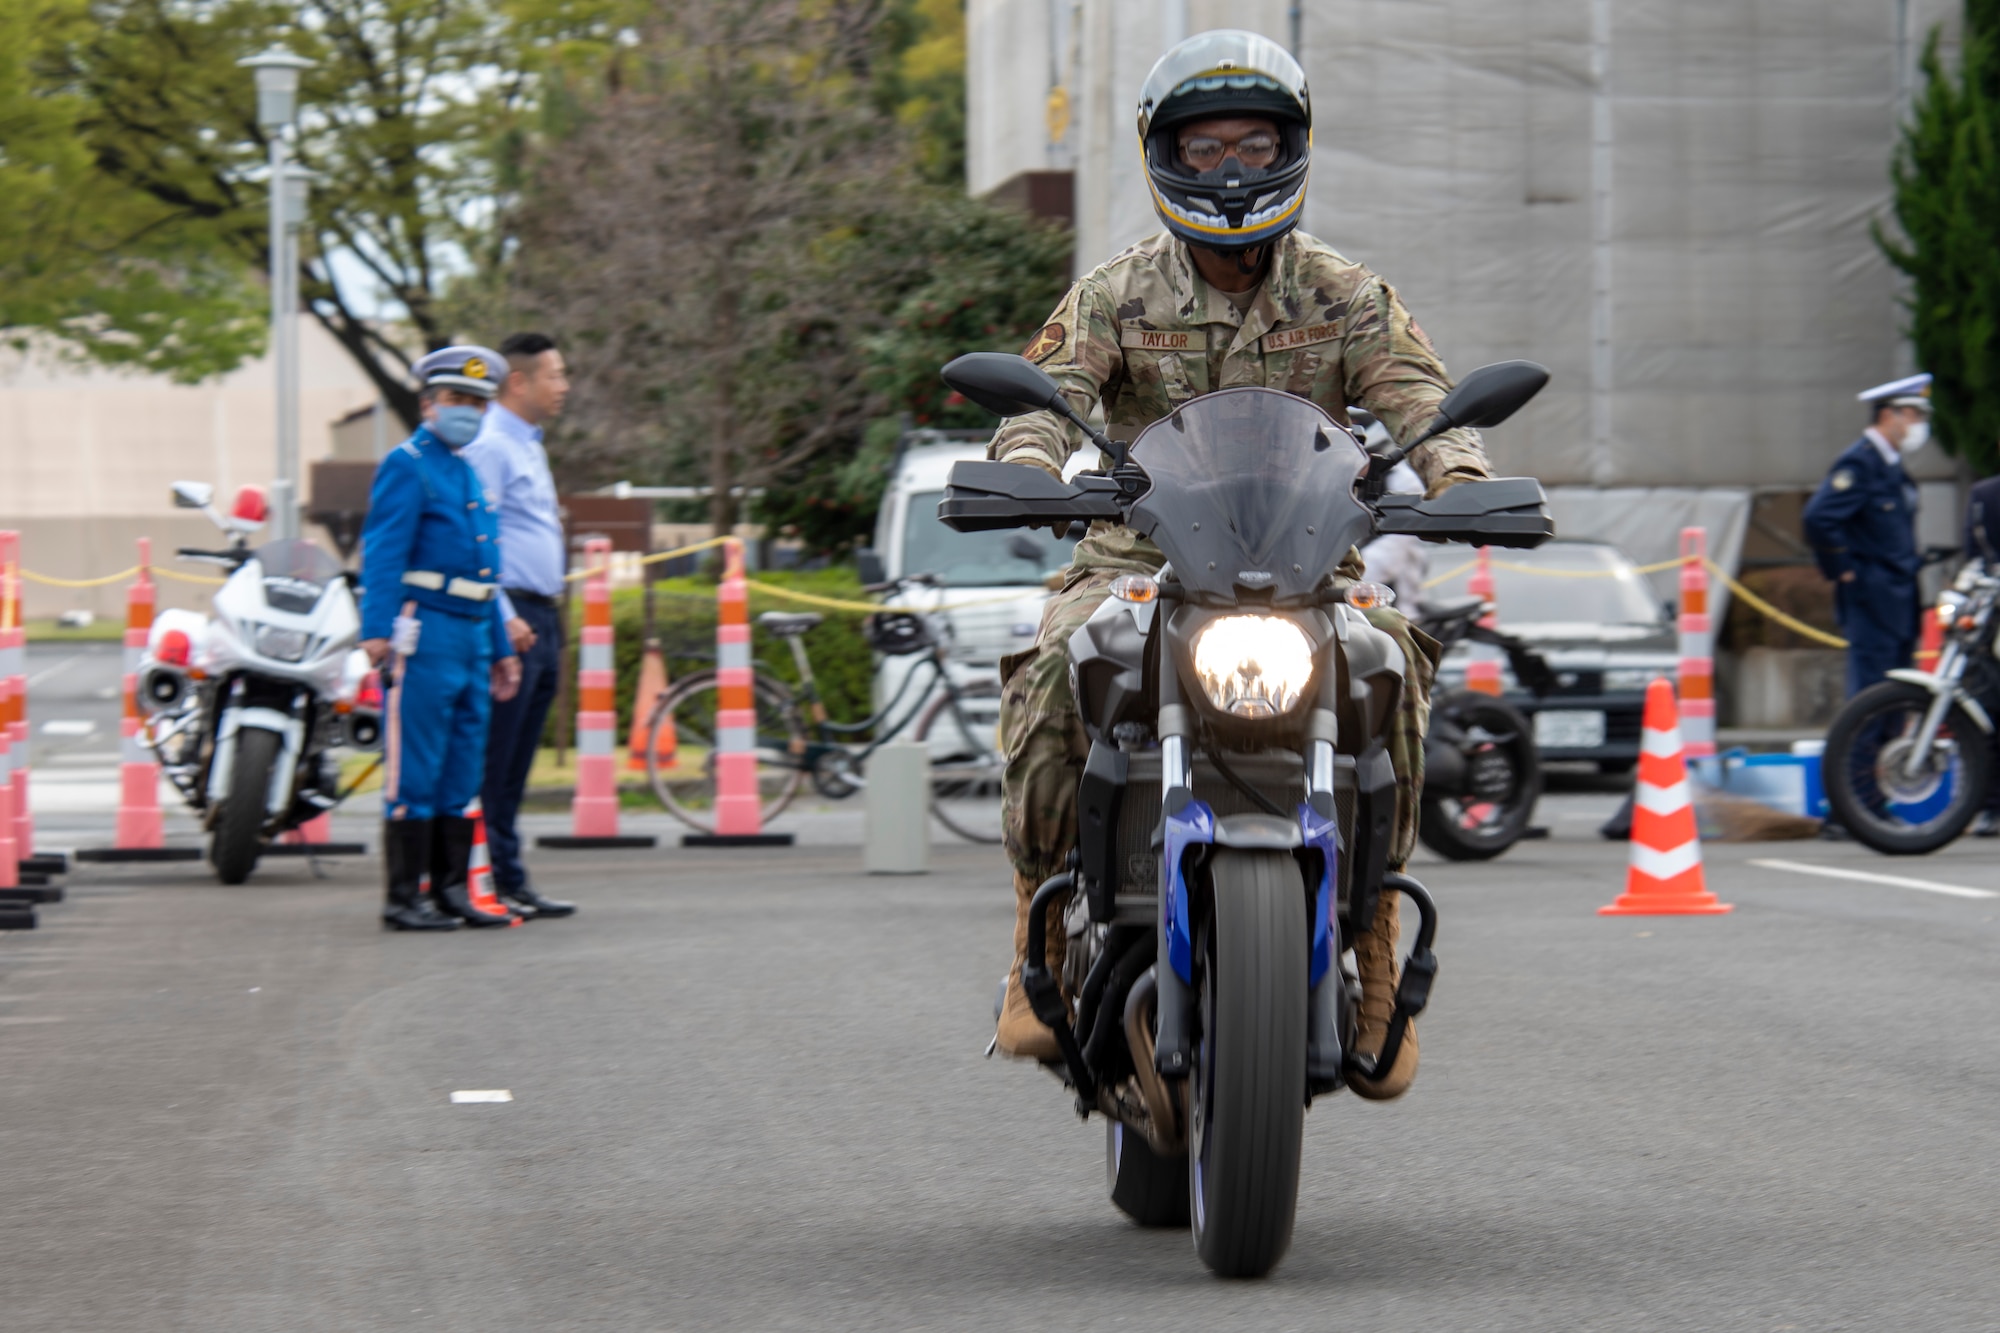 a uniformed soldier on a motorcycle drives toward the camera